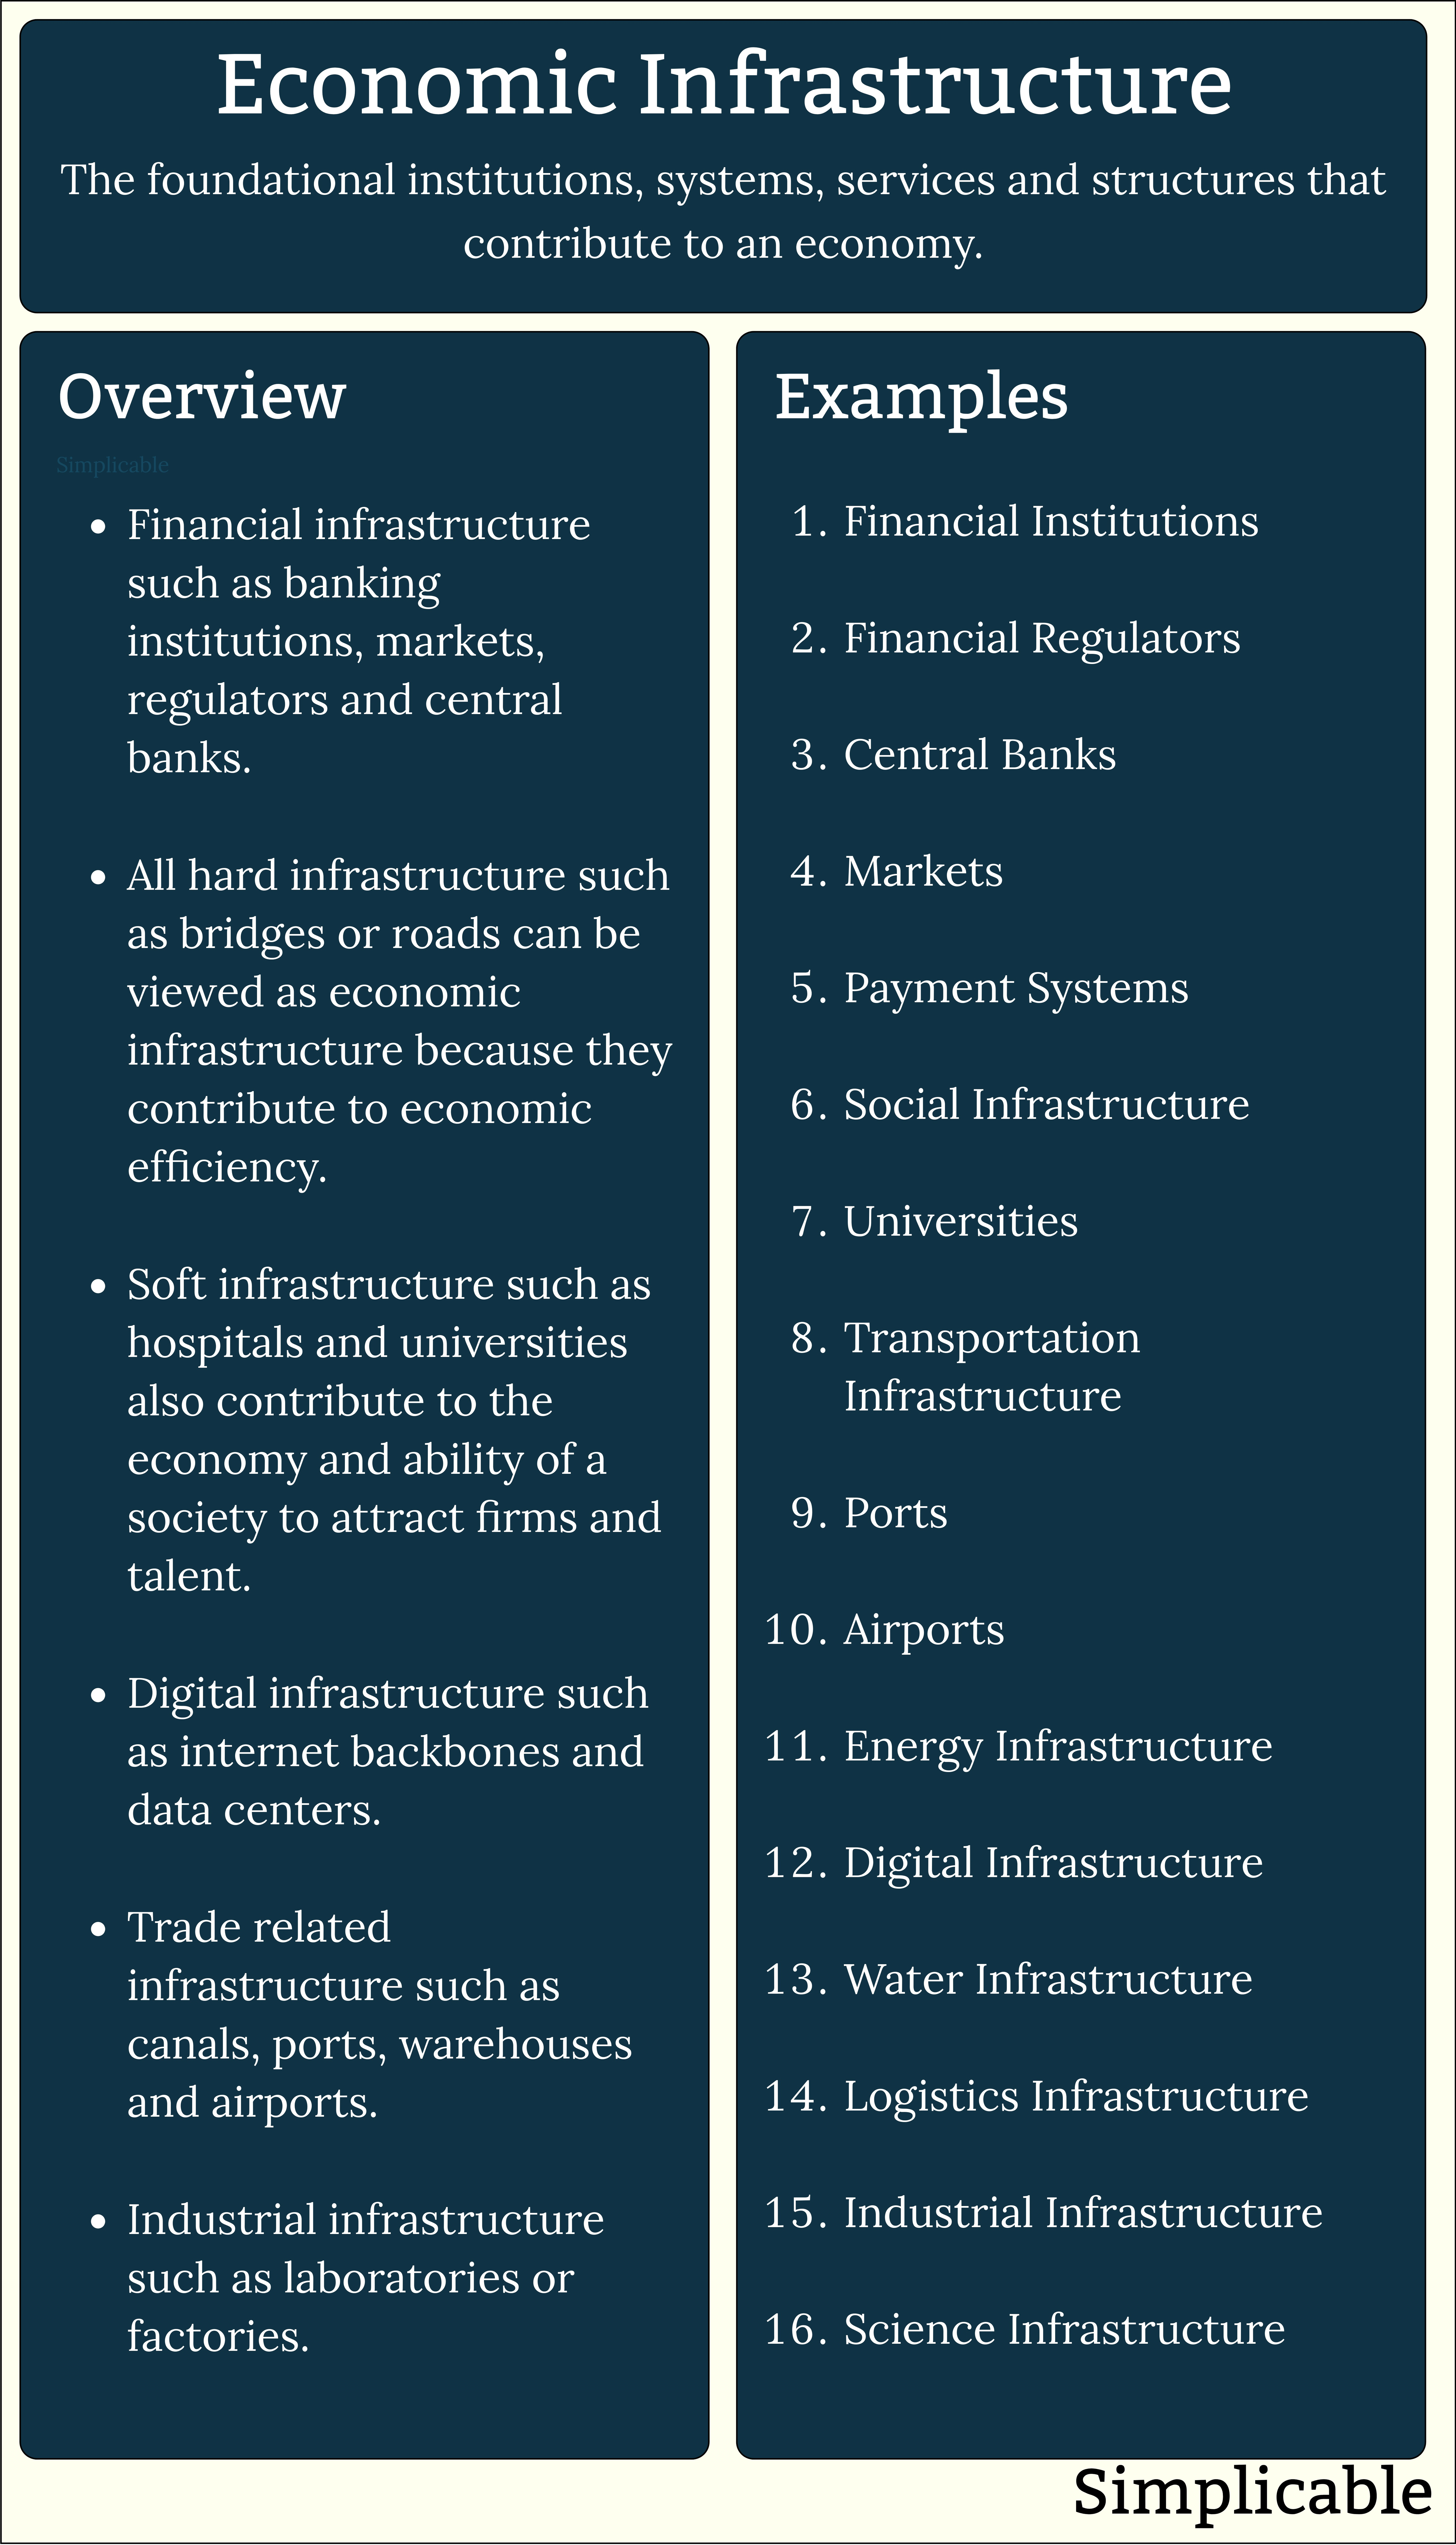 economic infrastructure overview and examples